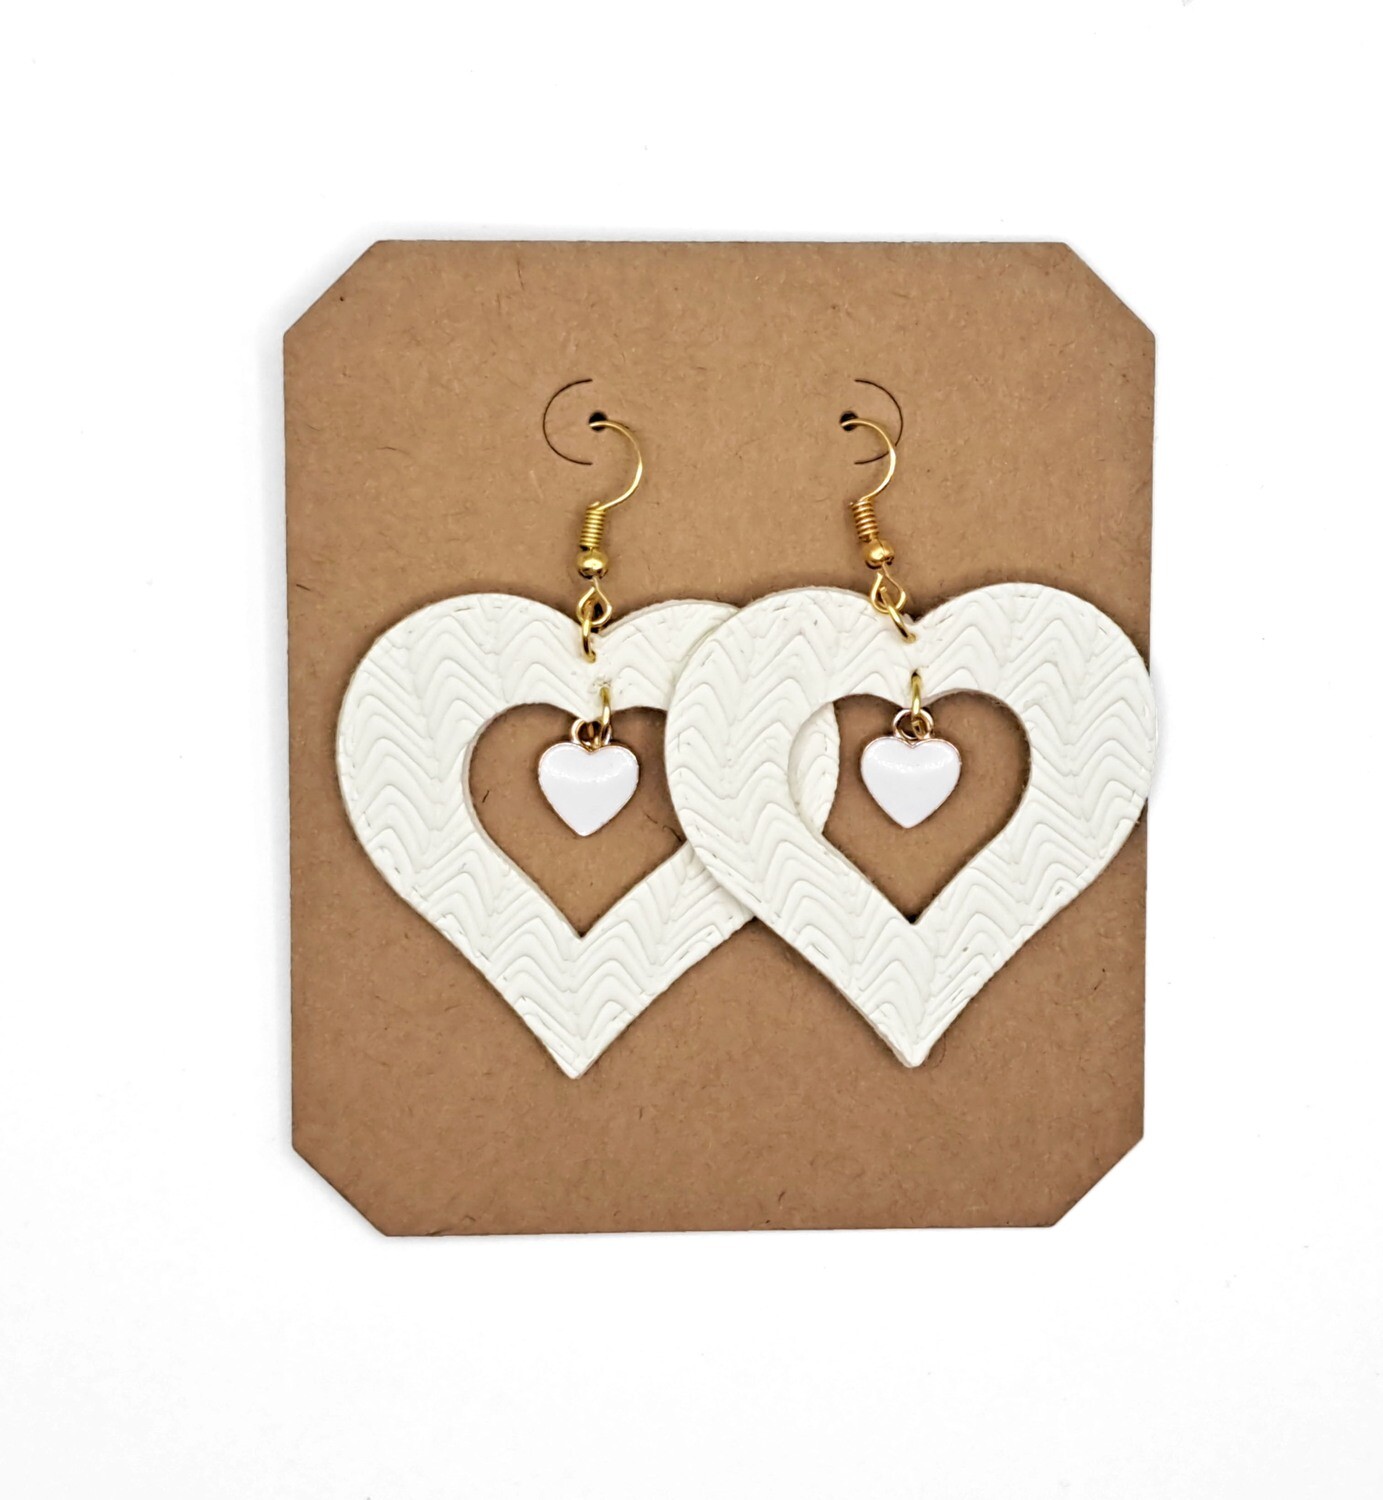 Handmade Faux Leather White Hearts Cut-out with Heart Charms Earrings